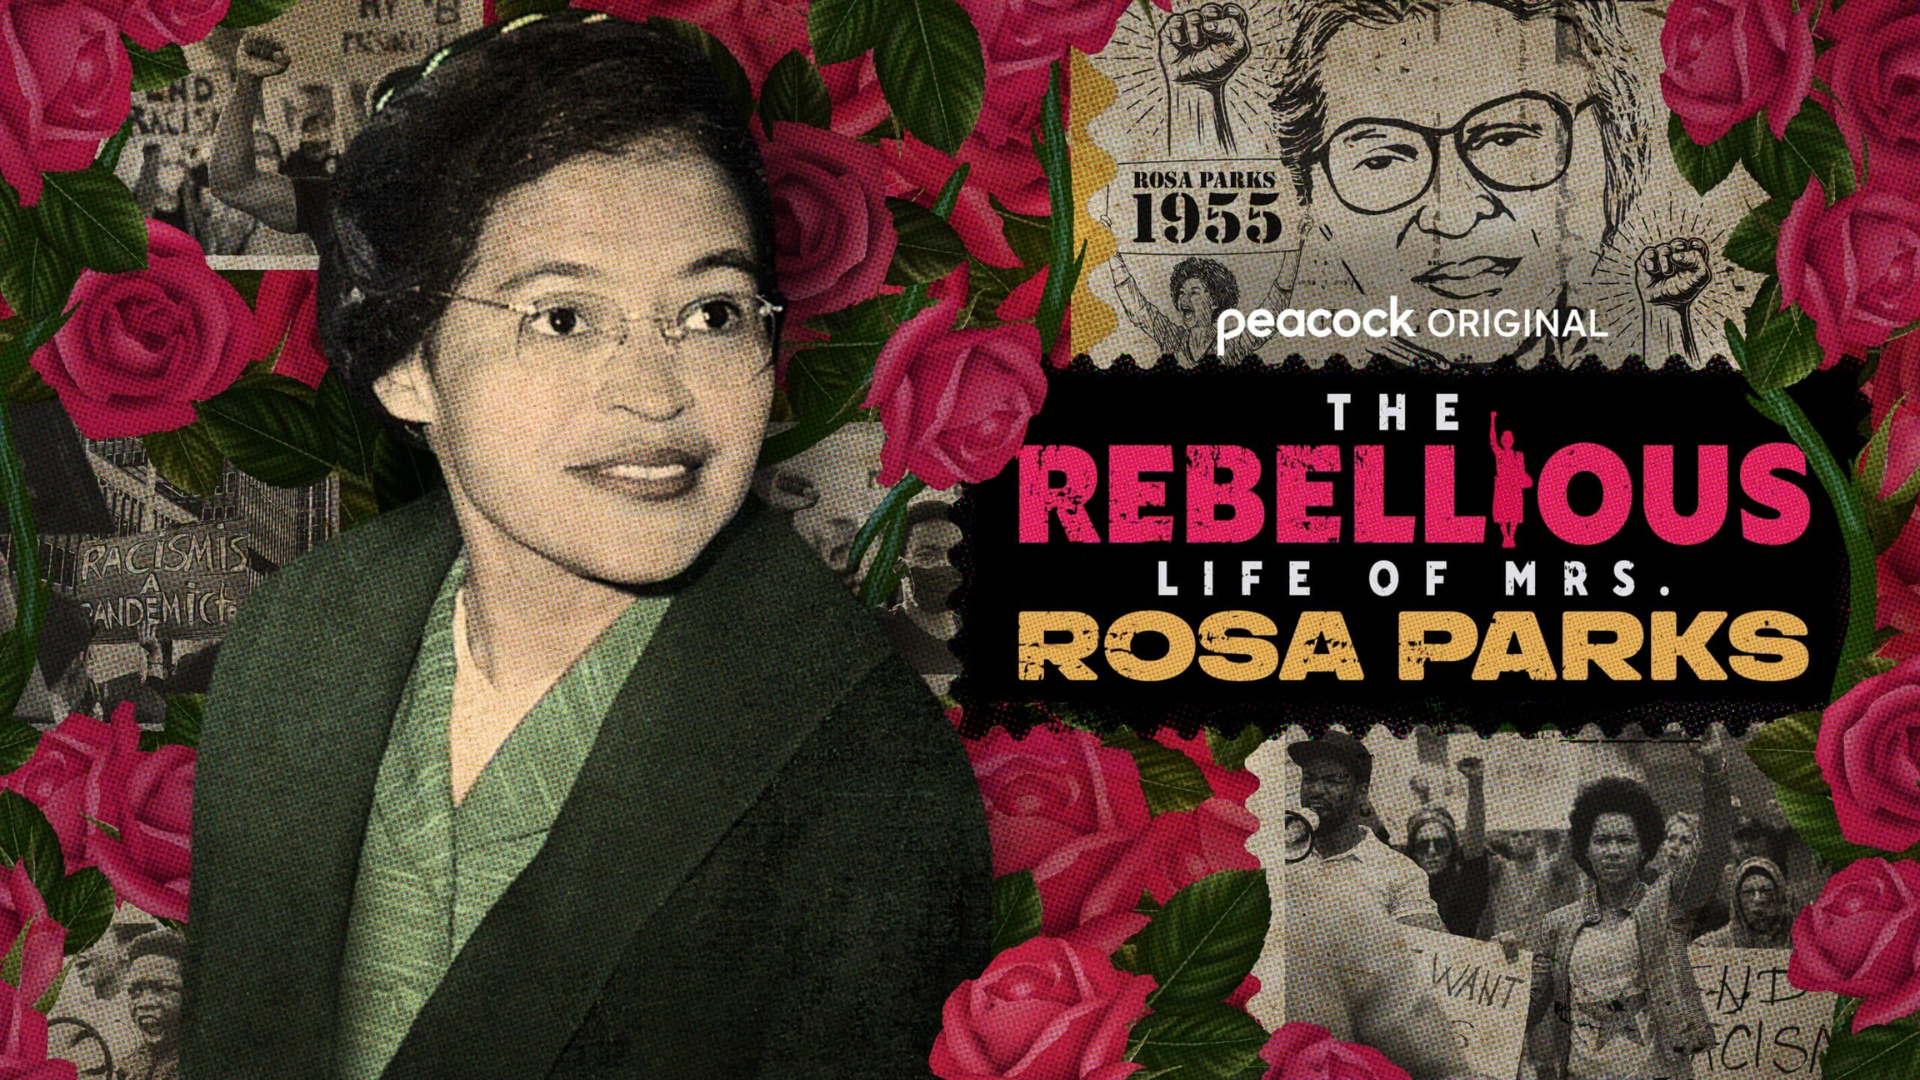 A photo of Rosa Parks on the left side of the image.  The title of the film appear on the right side: "The Rebellious Life of Mrs. Rosa Parks". There is a background of red flowers.